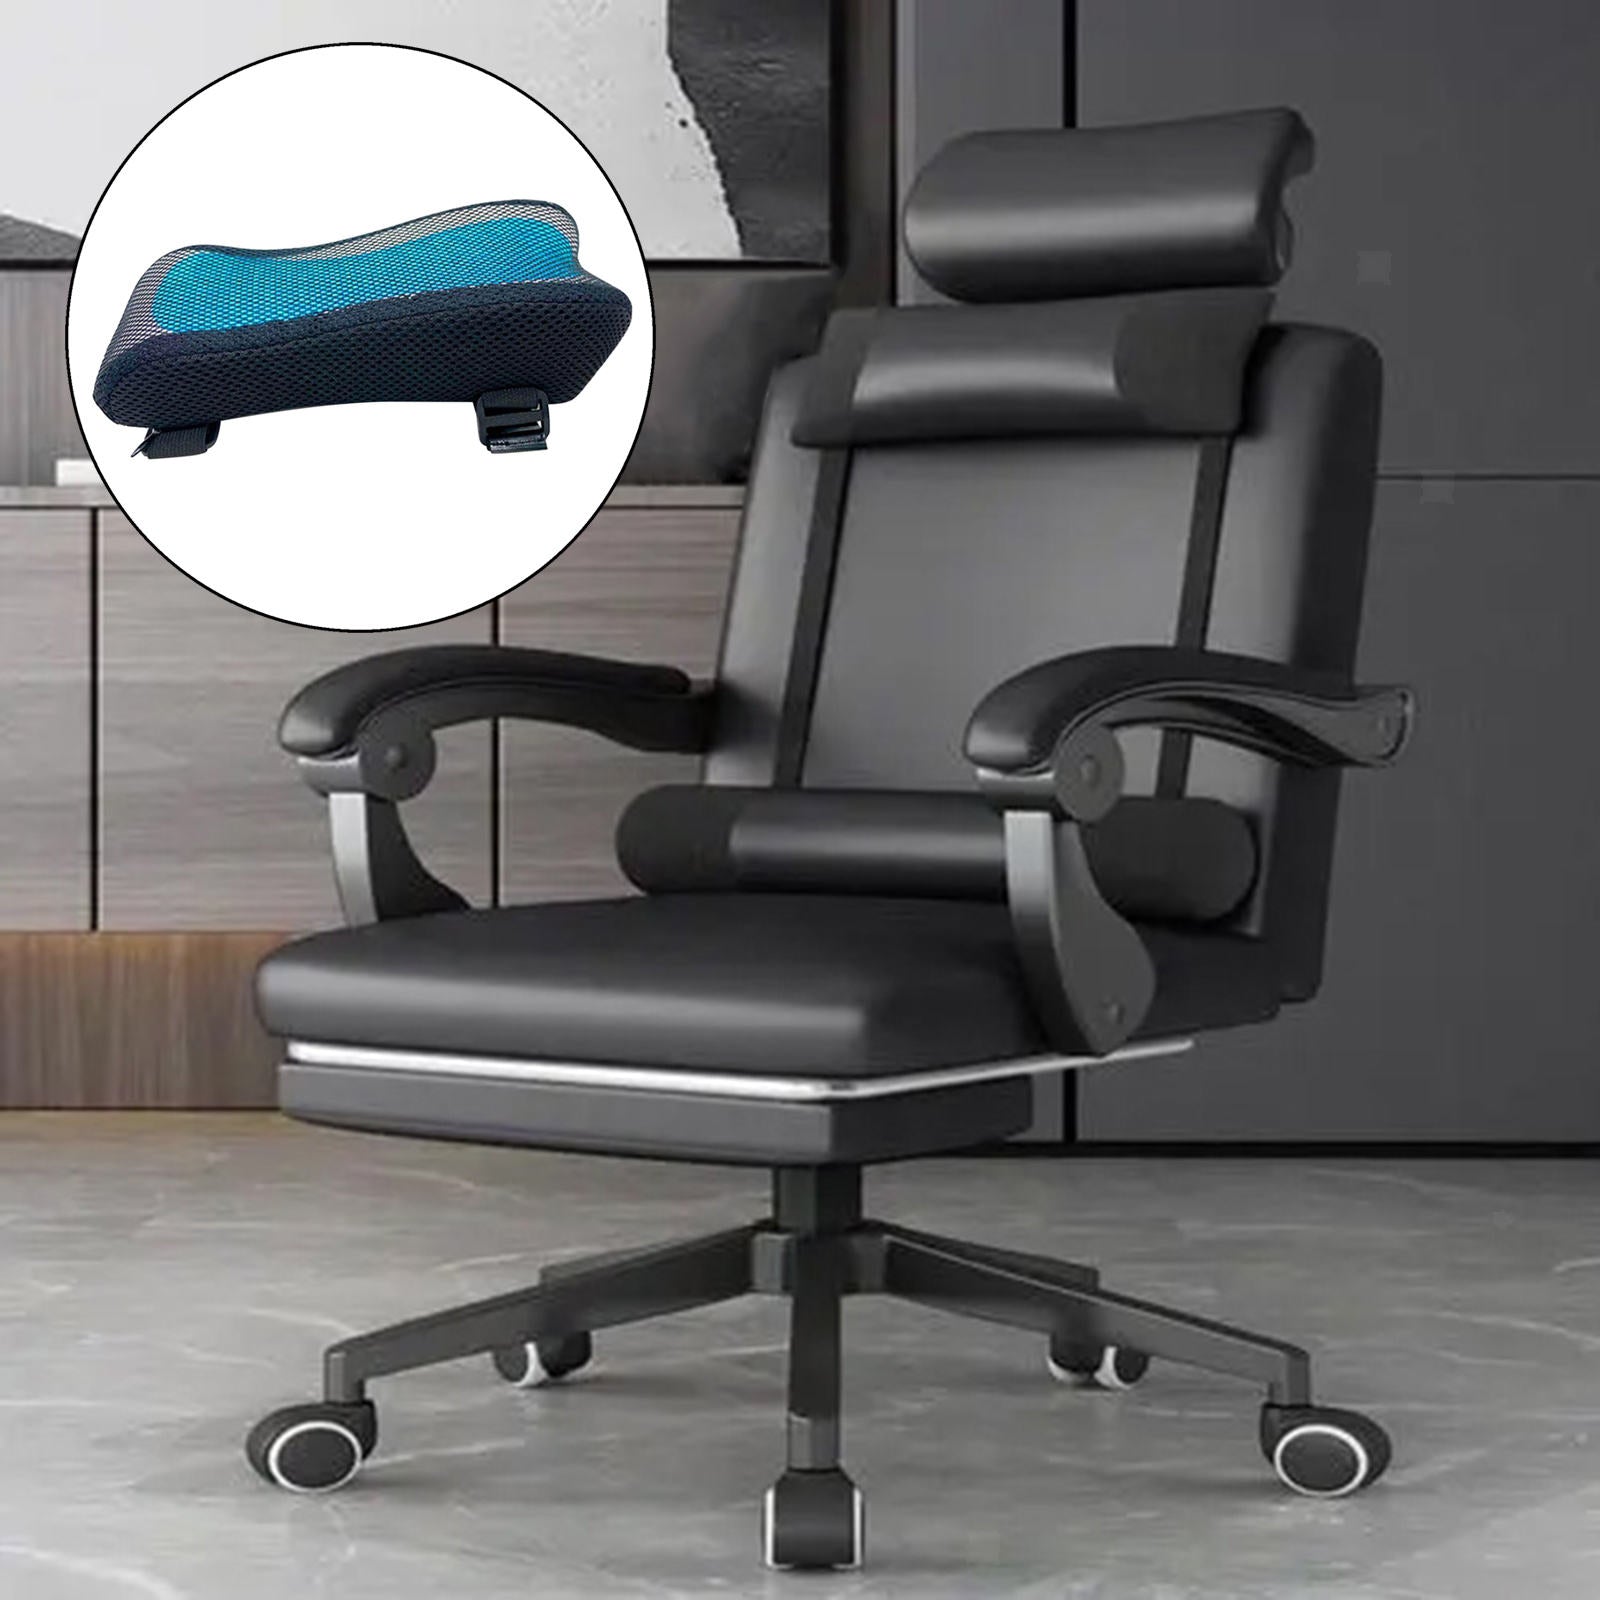 Comfortable Office Chair Armrest Pad Memory Cotton Soft Elbow Pillow